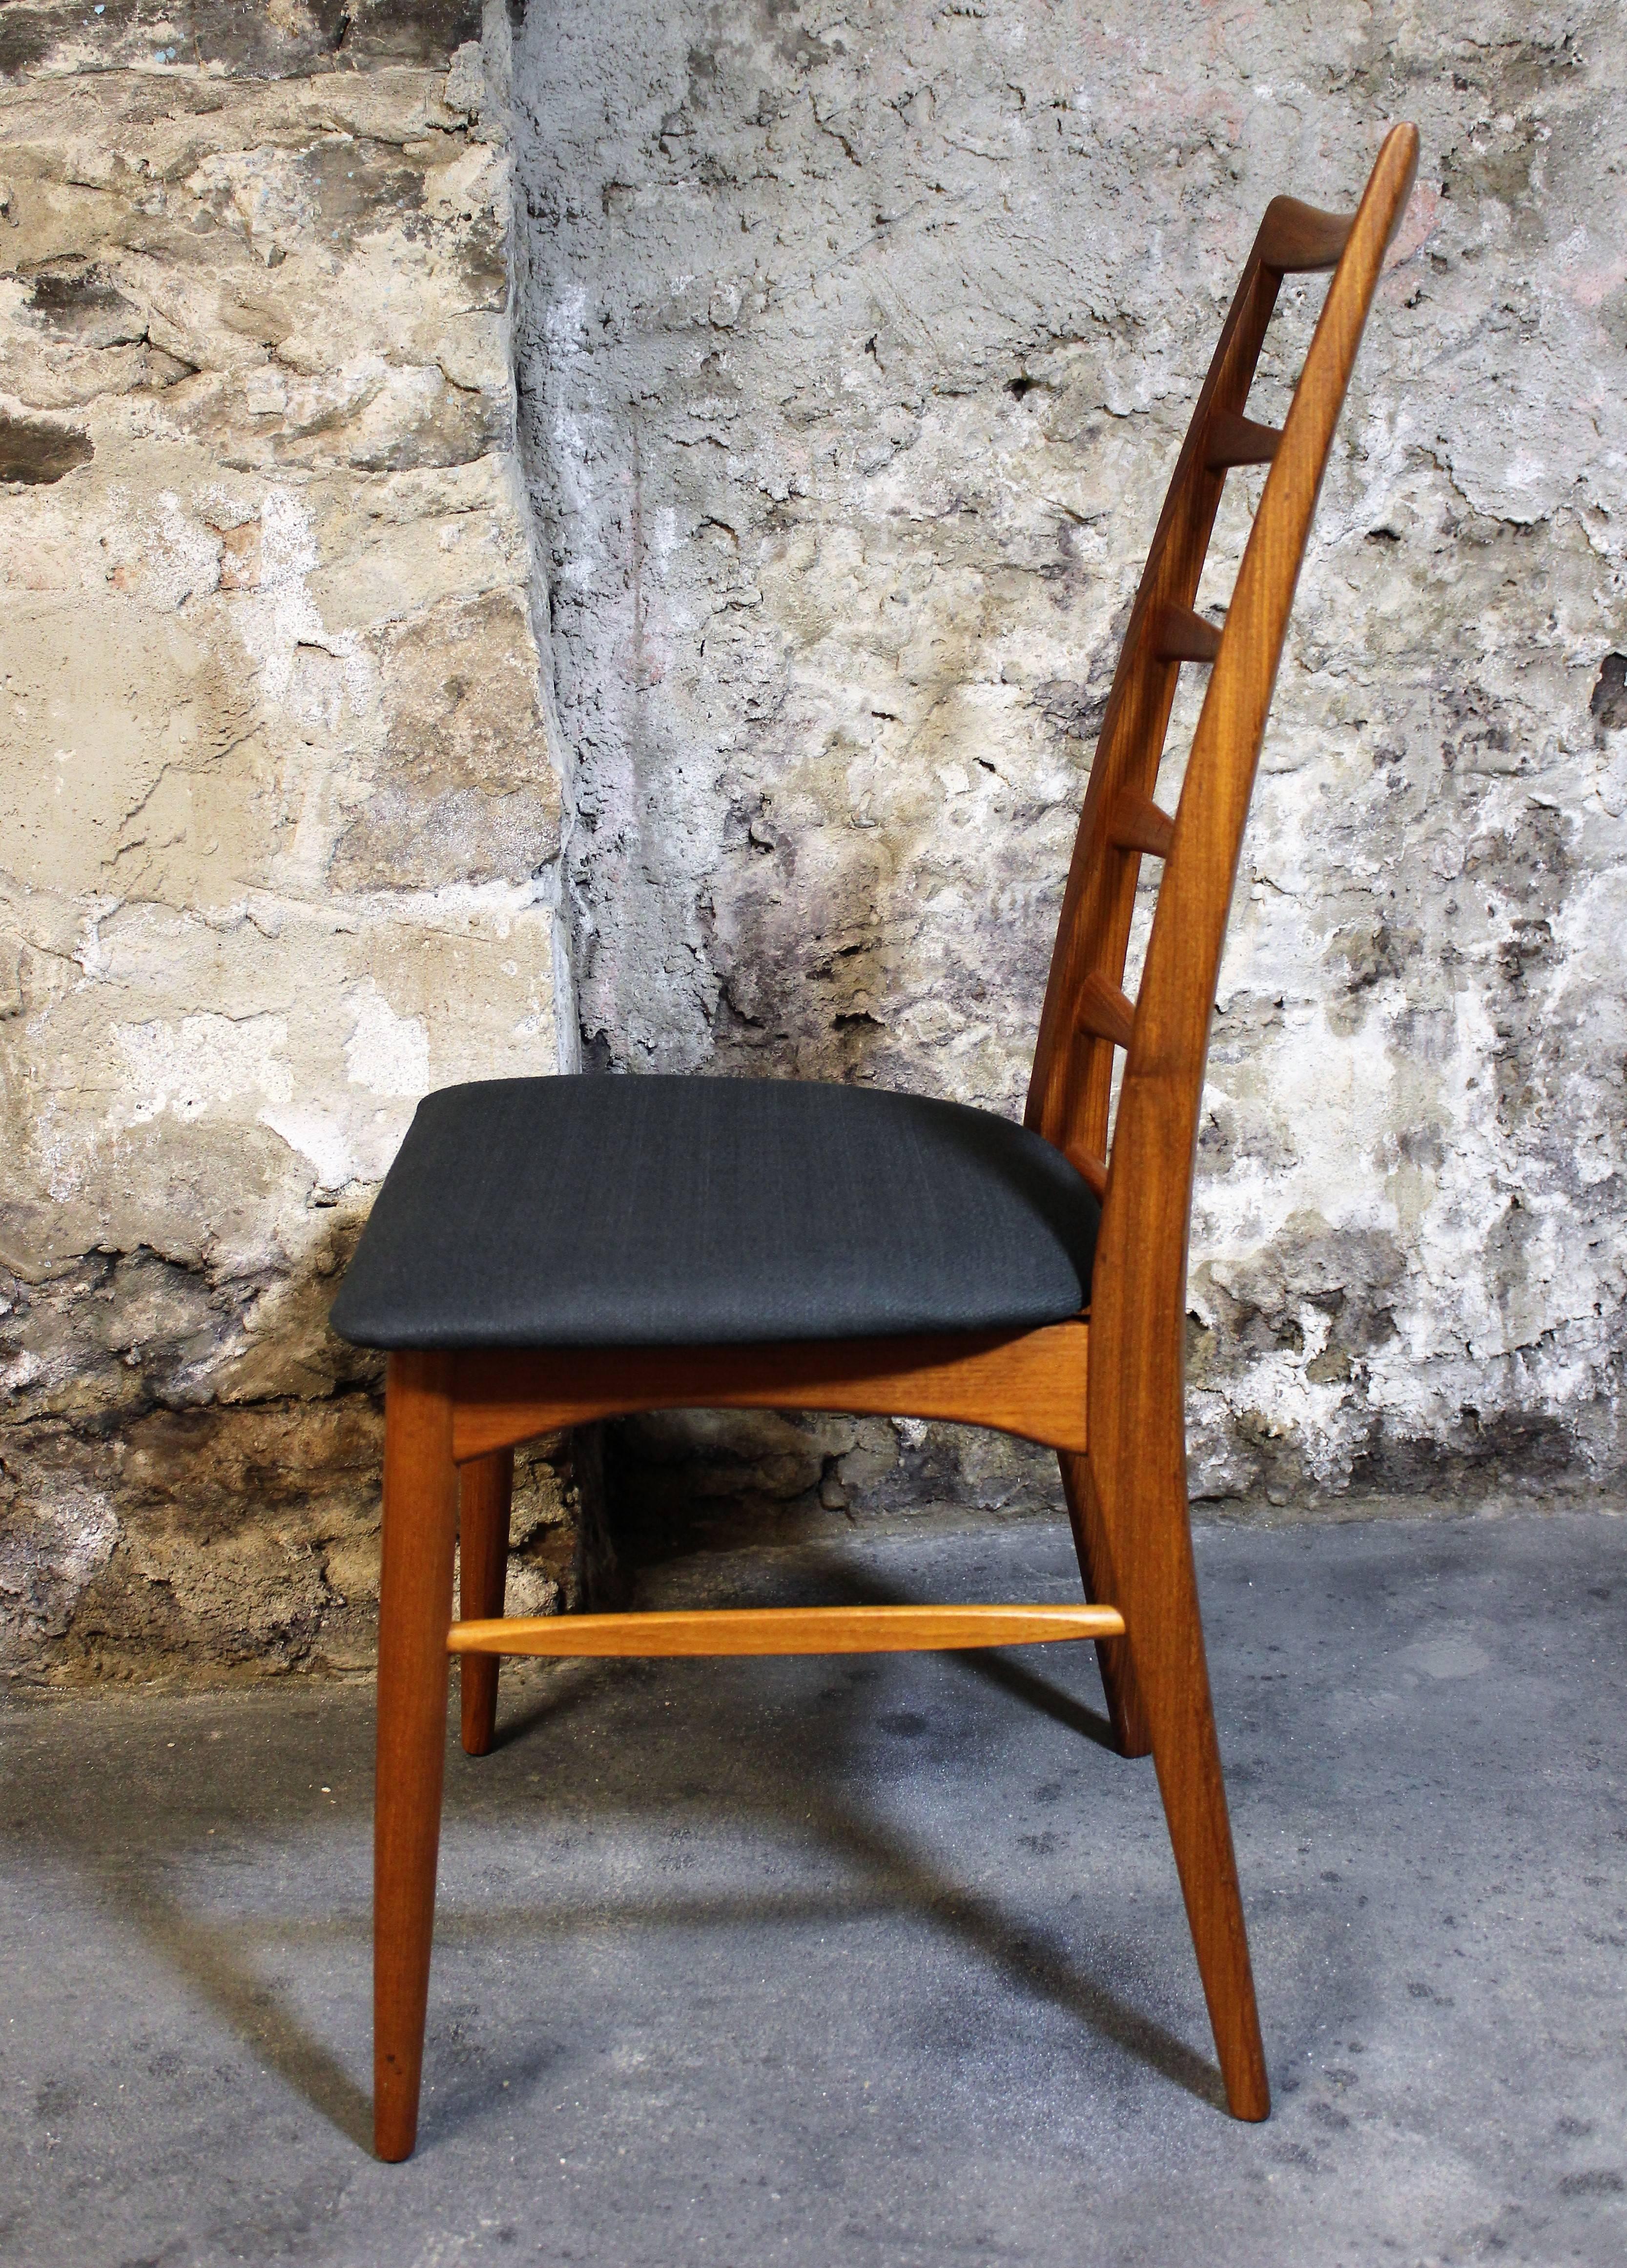 This set of four teak "Lis" ladder back chairs were designed by Neils Koefoed for Koefoeds Hornslet in Denmark. The chairs have been re-upholstered in black fabric.

Mid-Century Modern / Scandinavian Modern